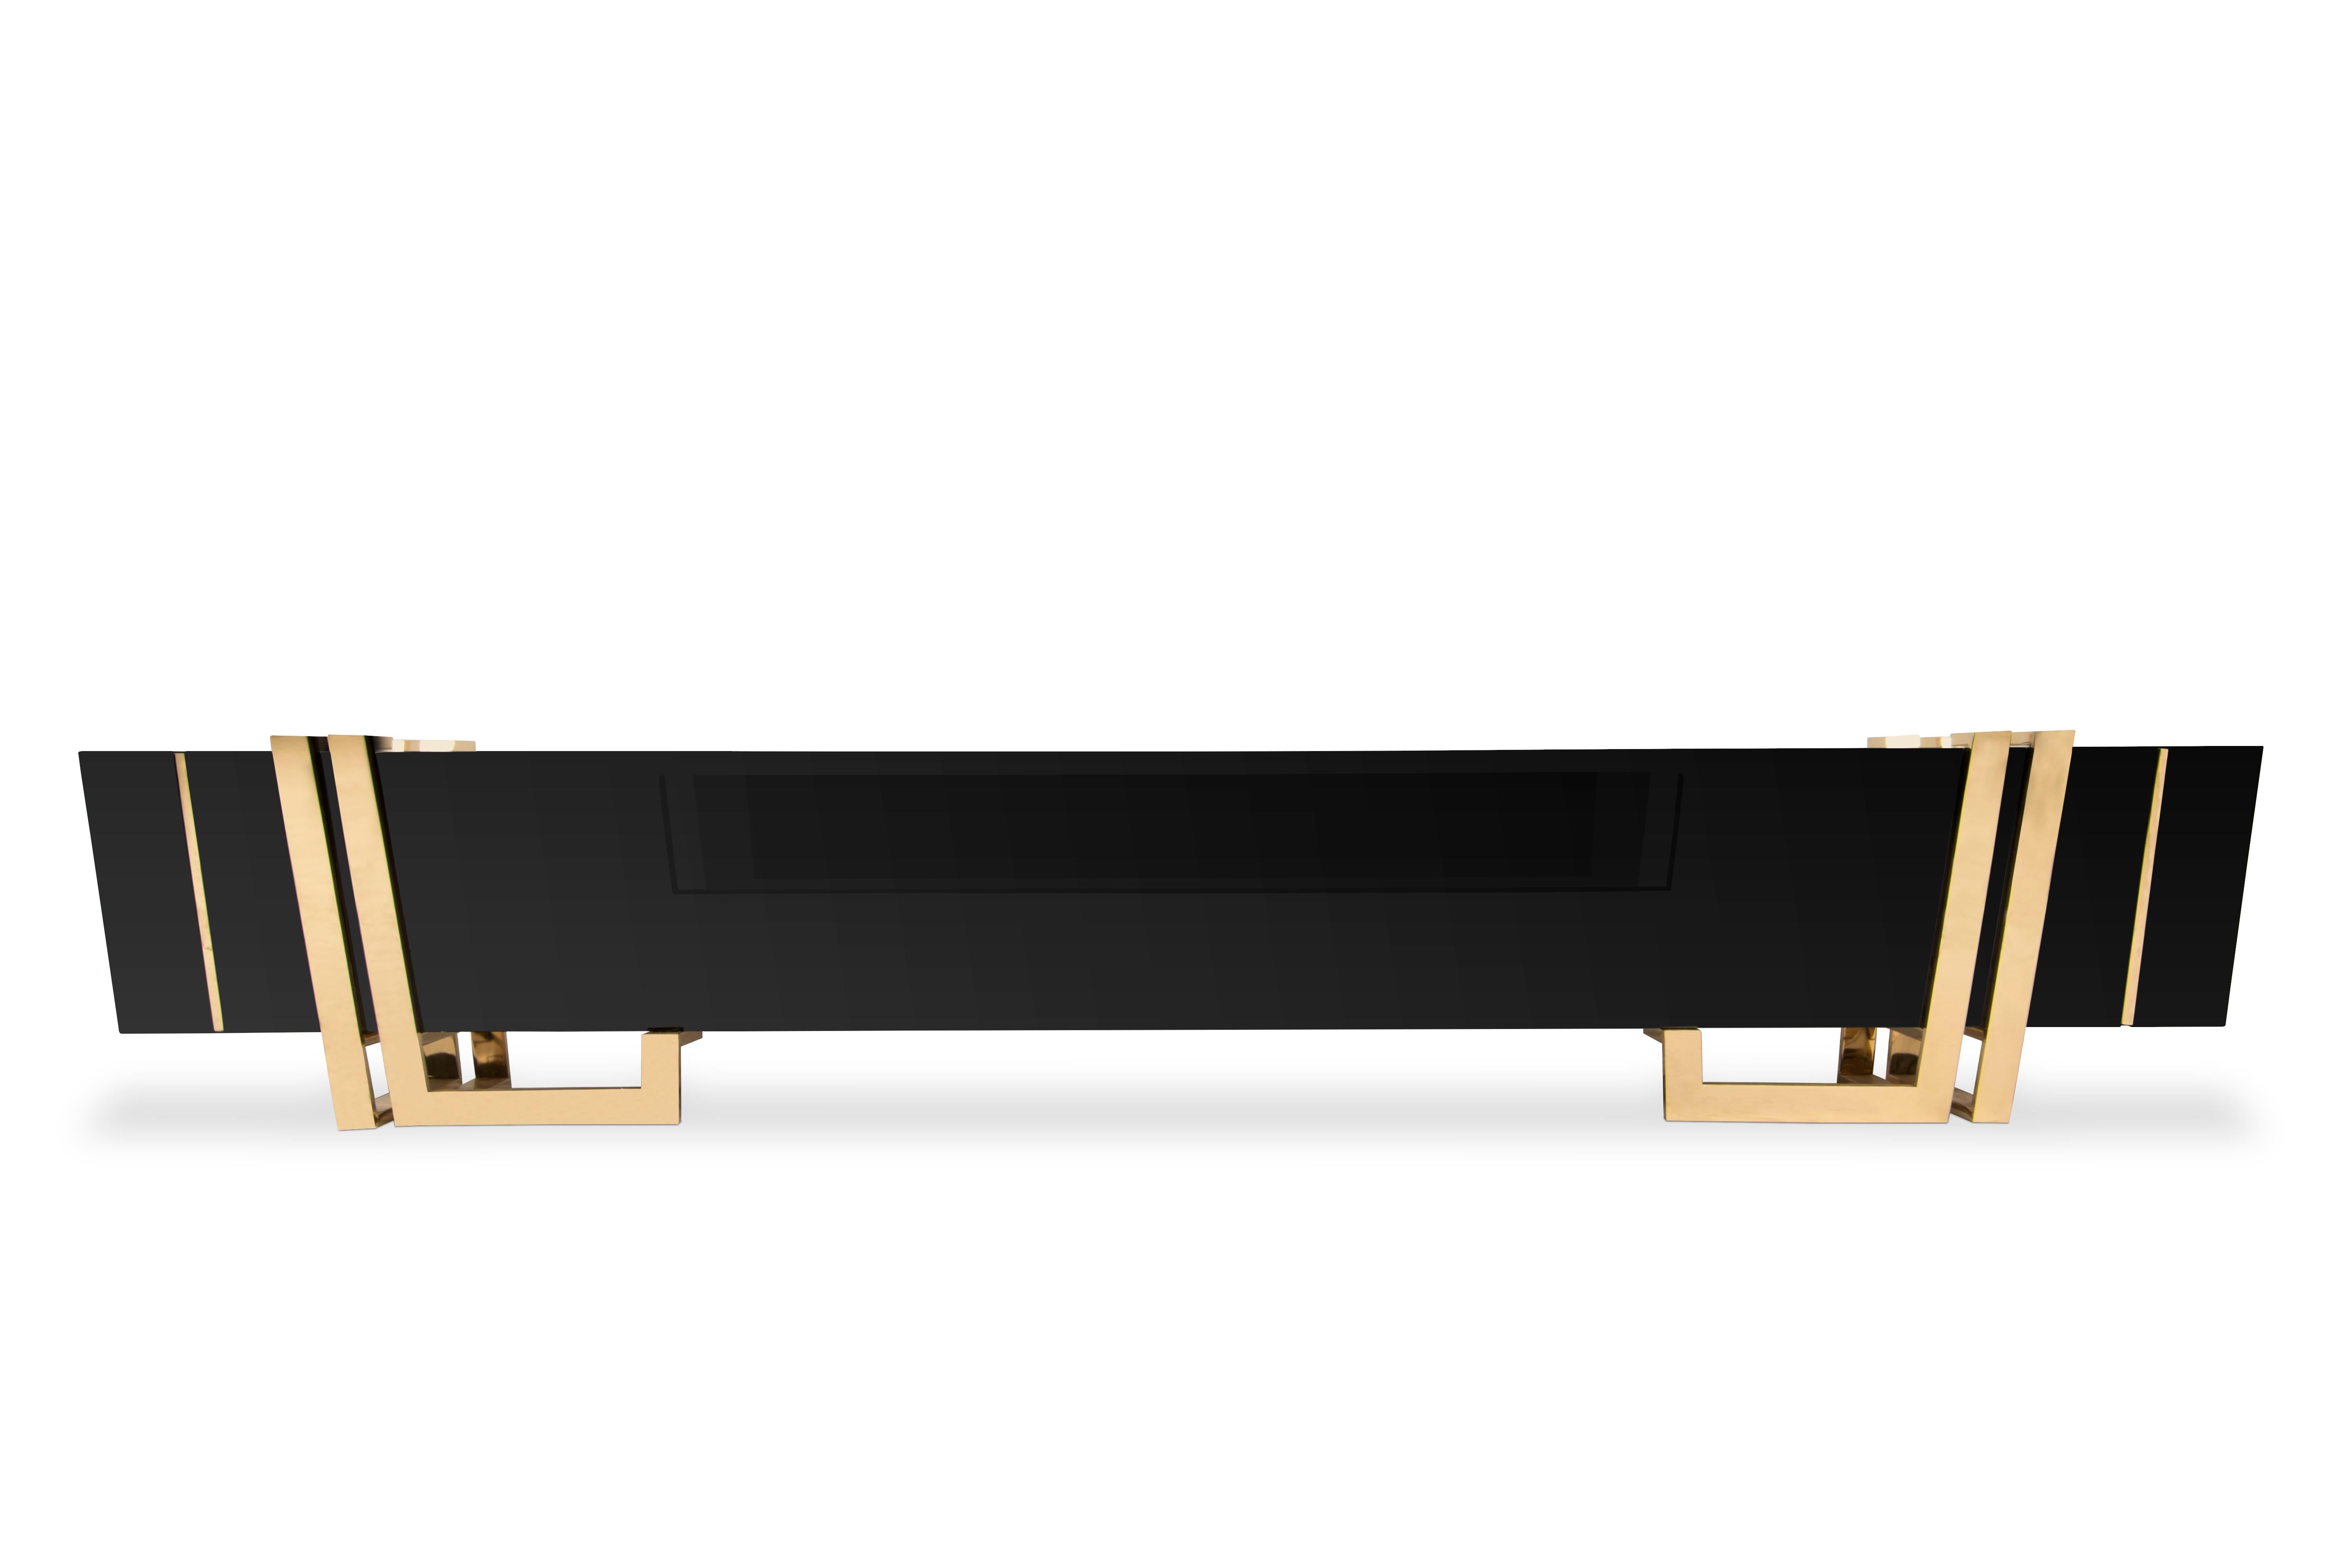 An anthem of sophistication and exclusive design. The Apotheosis TV cabinet is a defining presence and will change any room it is part of, creating a glorious atmosphere around it. A daring, yet elegant balance between the finest materials, Nero